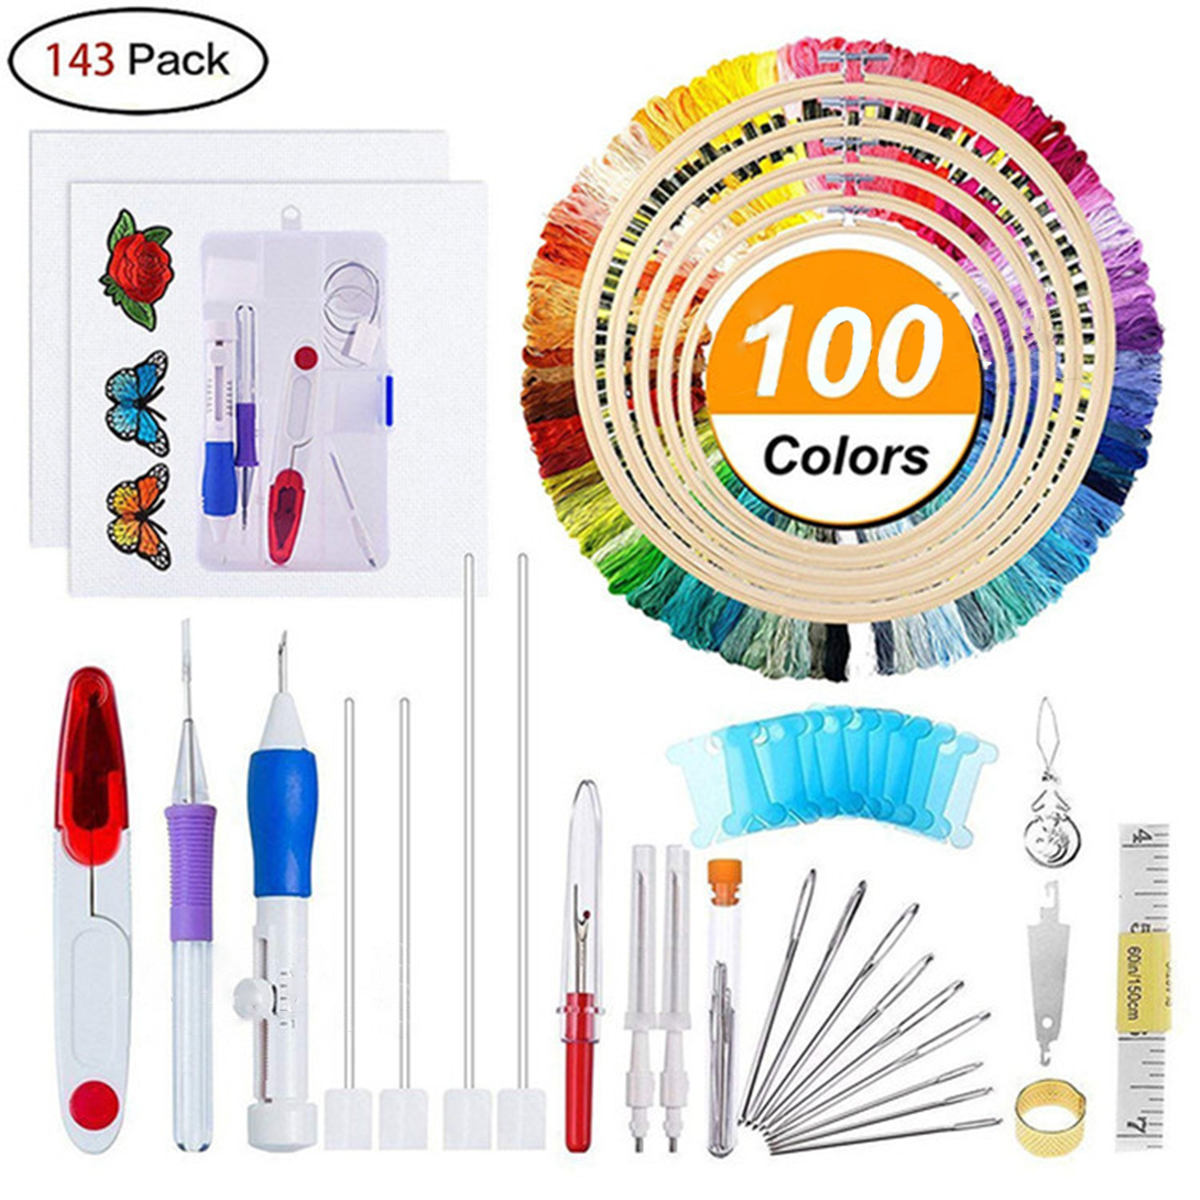 Embroidery Kit Poking Needle Embroidery Thread Tools for Beginners